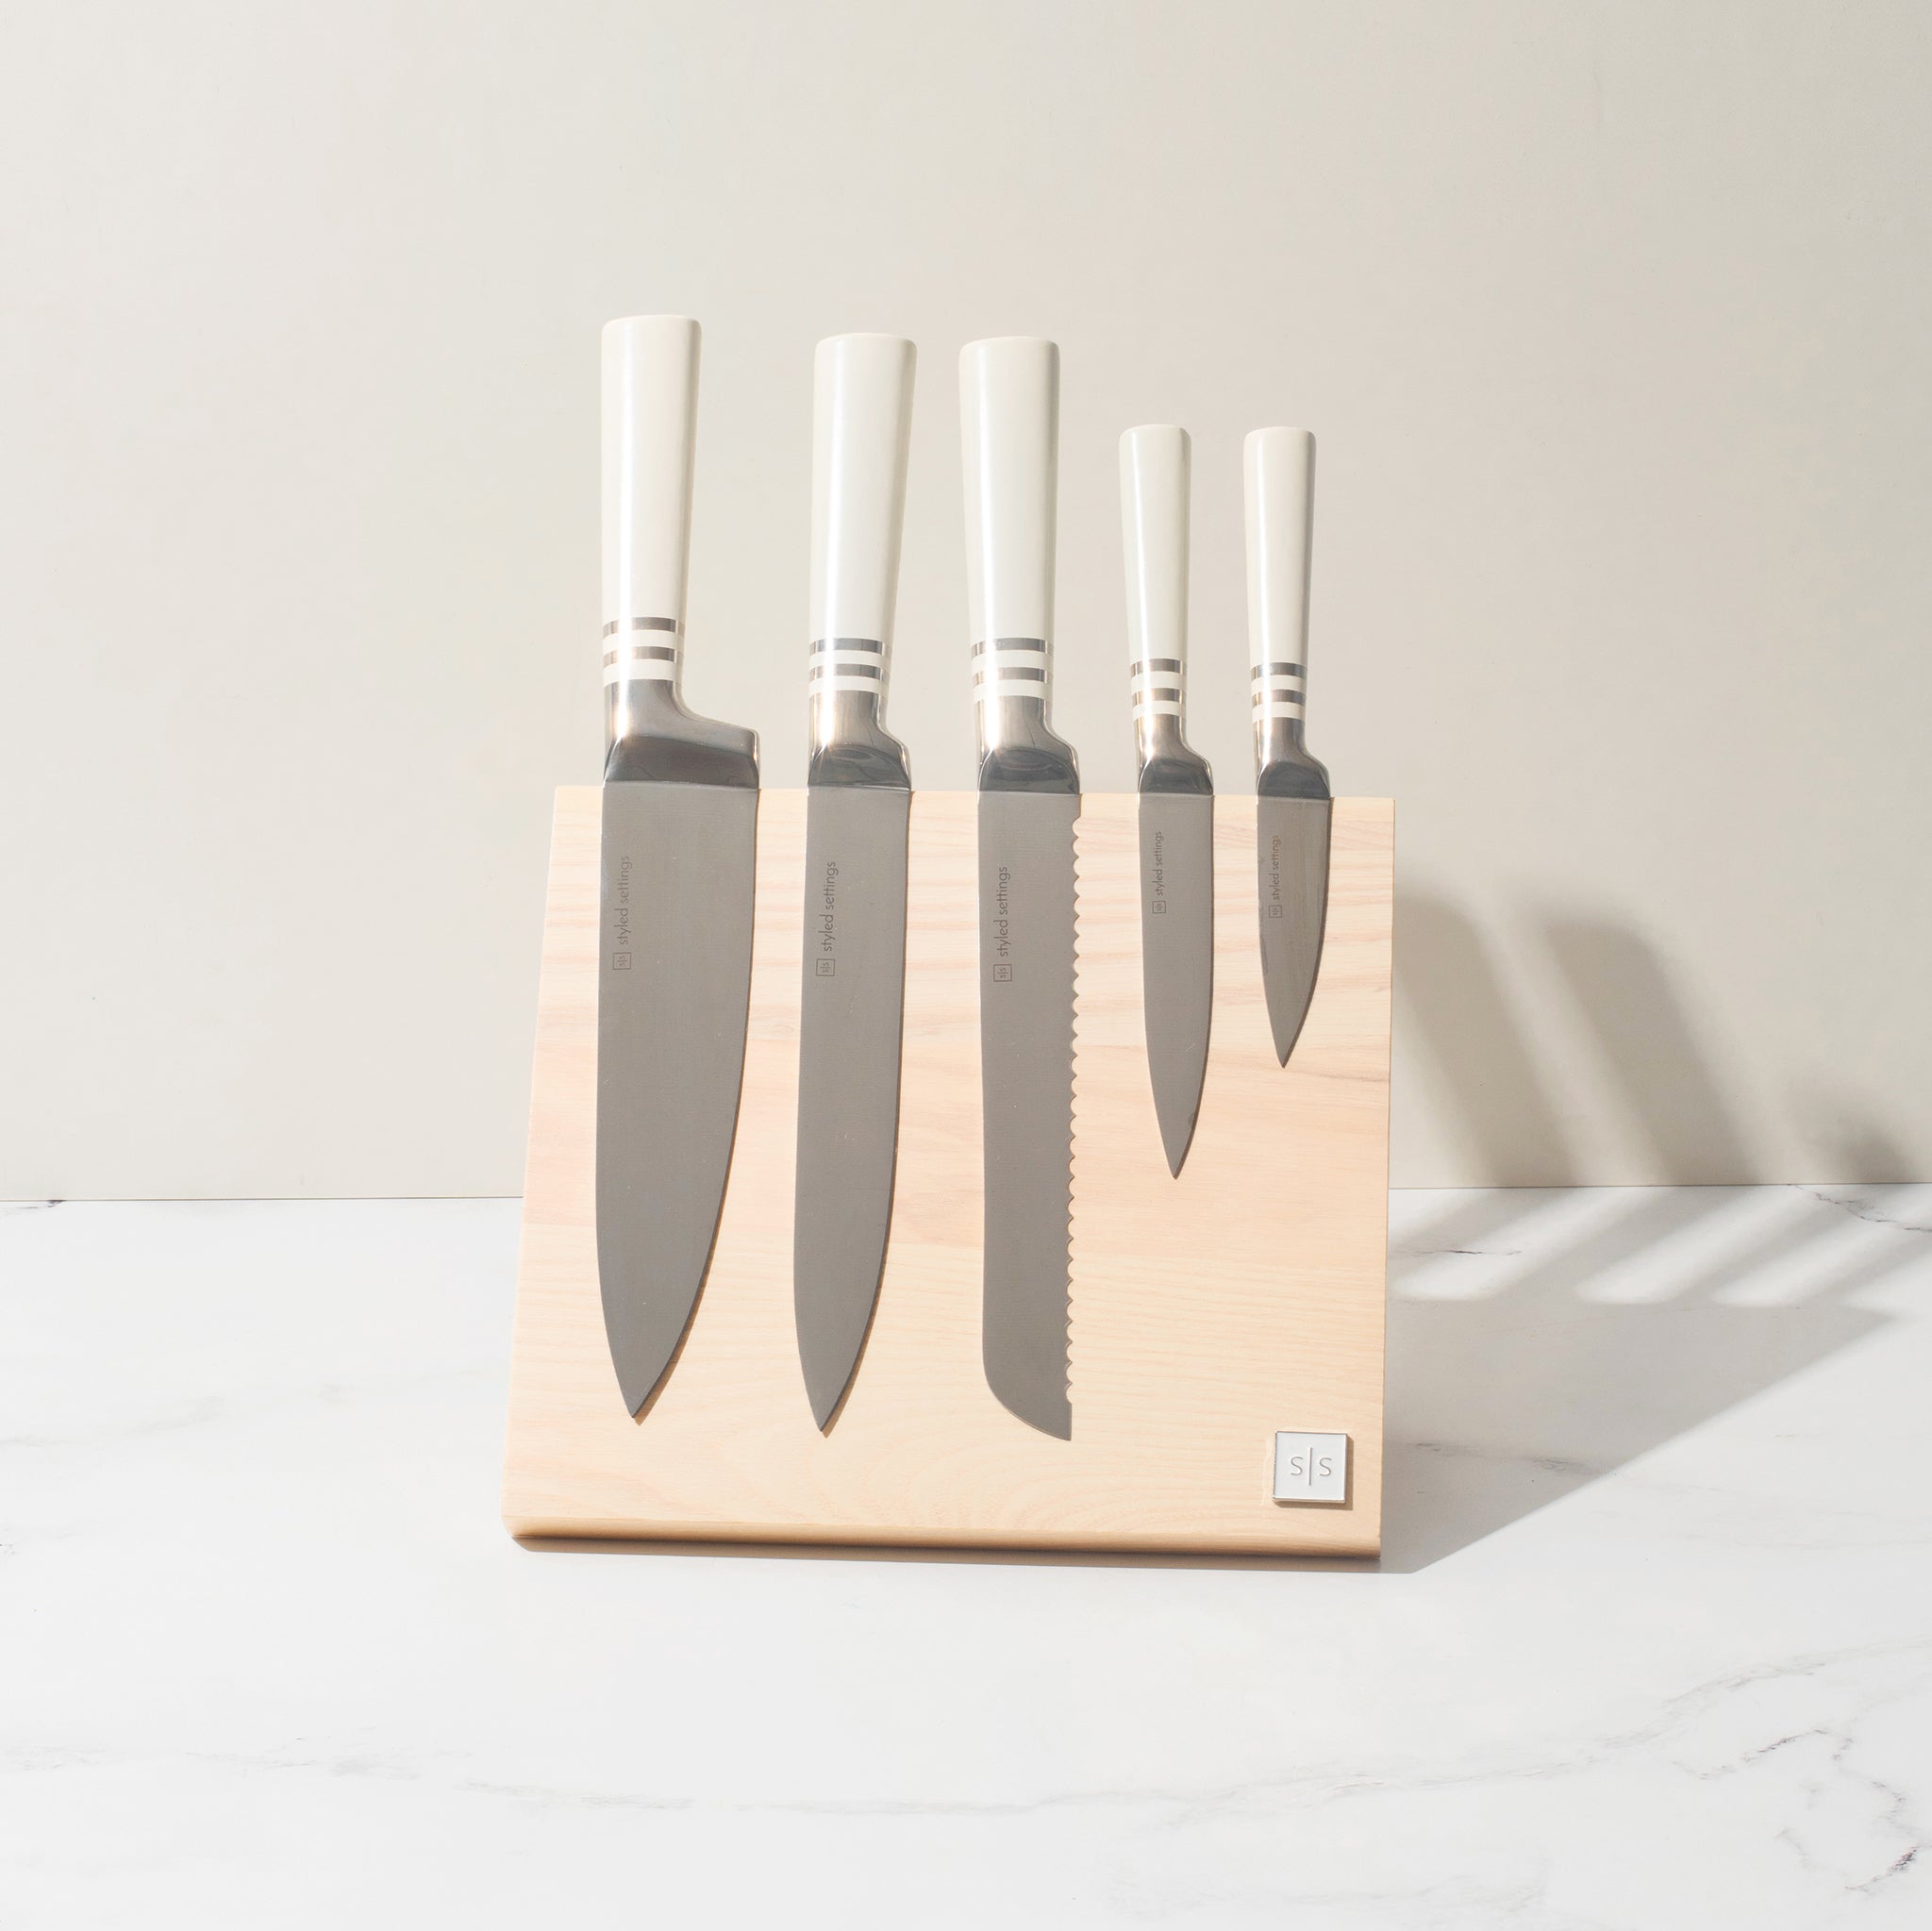  White Knife Set with Magnetic Knife Holder Stand - 6 PC White  Magnetic Knife Set Includes White Handle Knife Set with Ashwood Magnetic Knife  Block - White Kitchen Accessories, White Kitchen